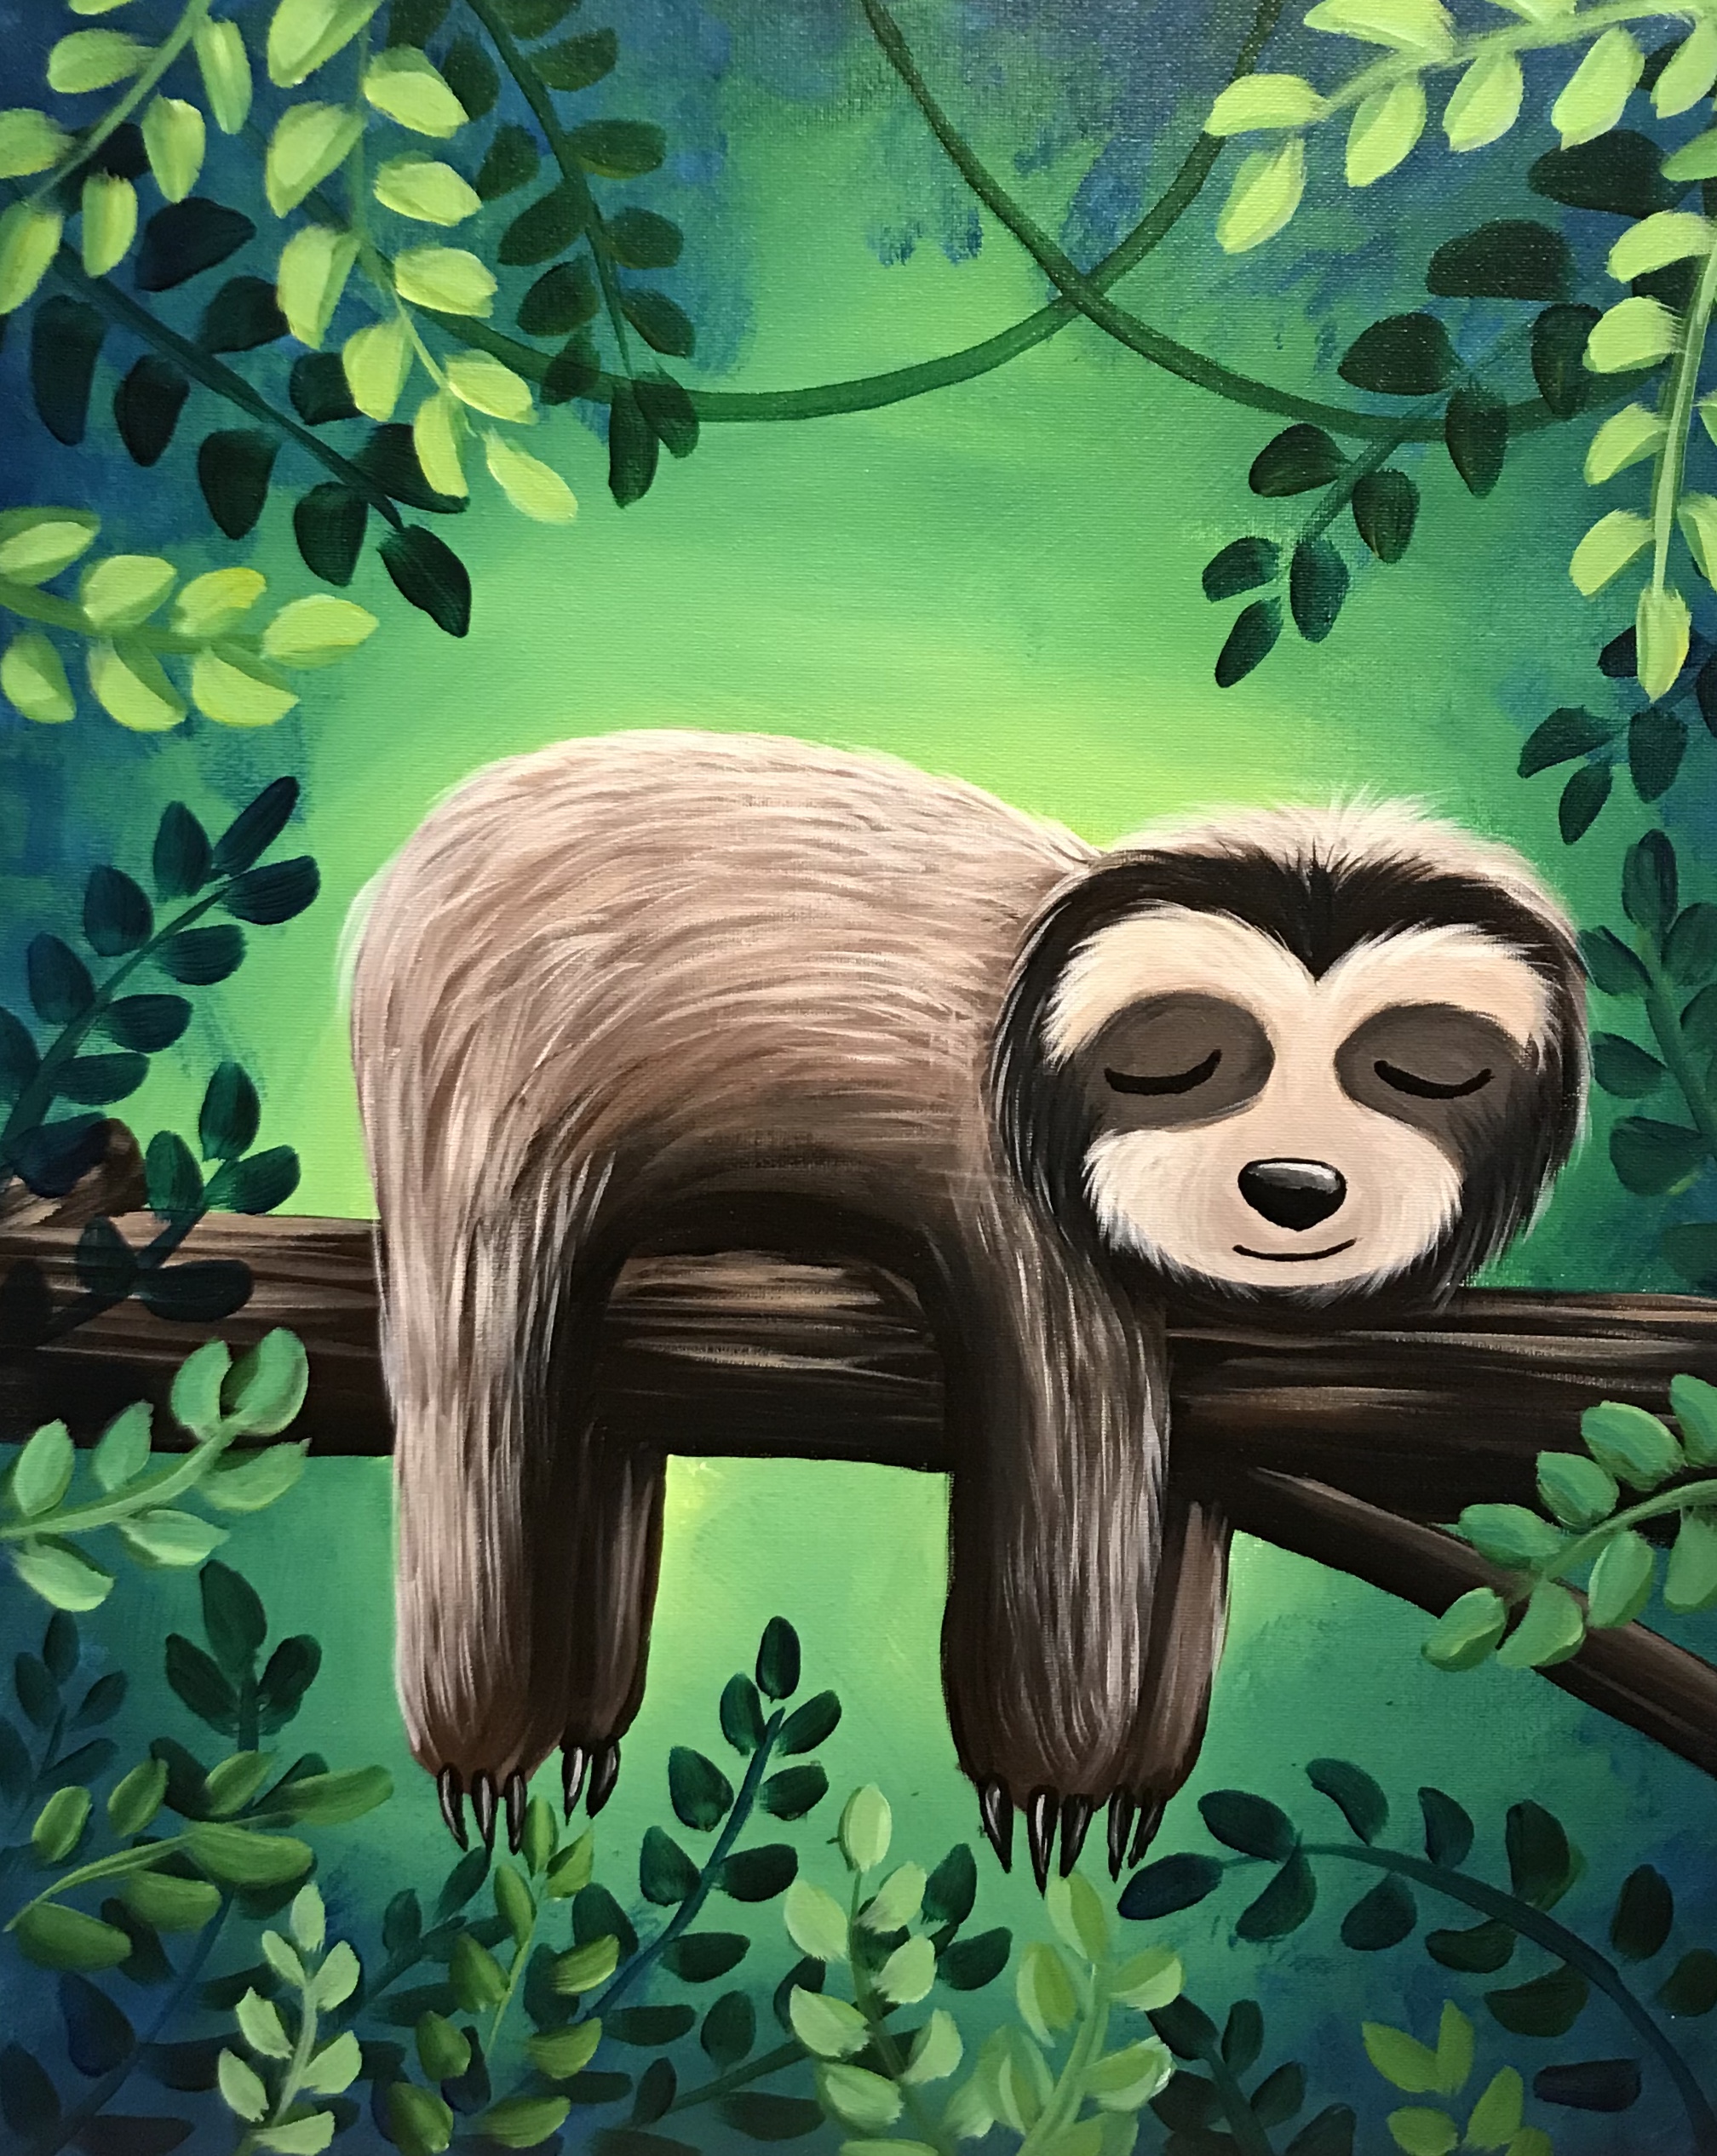 A Sleepy Sloth experience project by Yaymaker